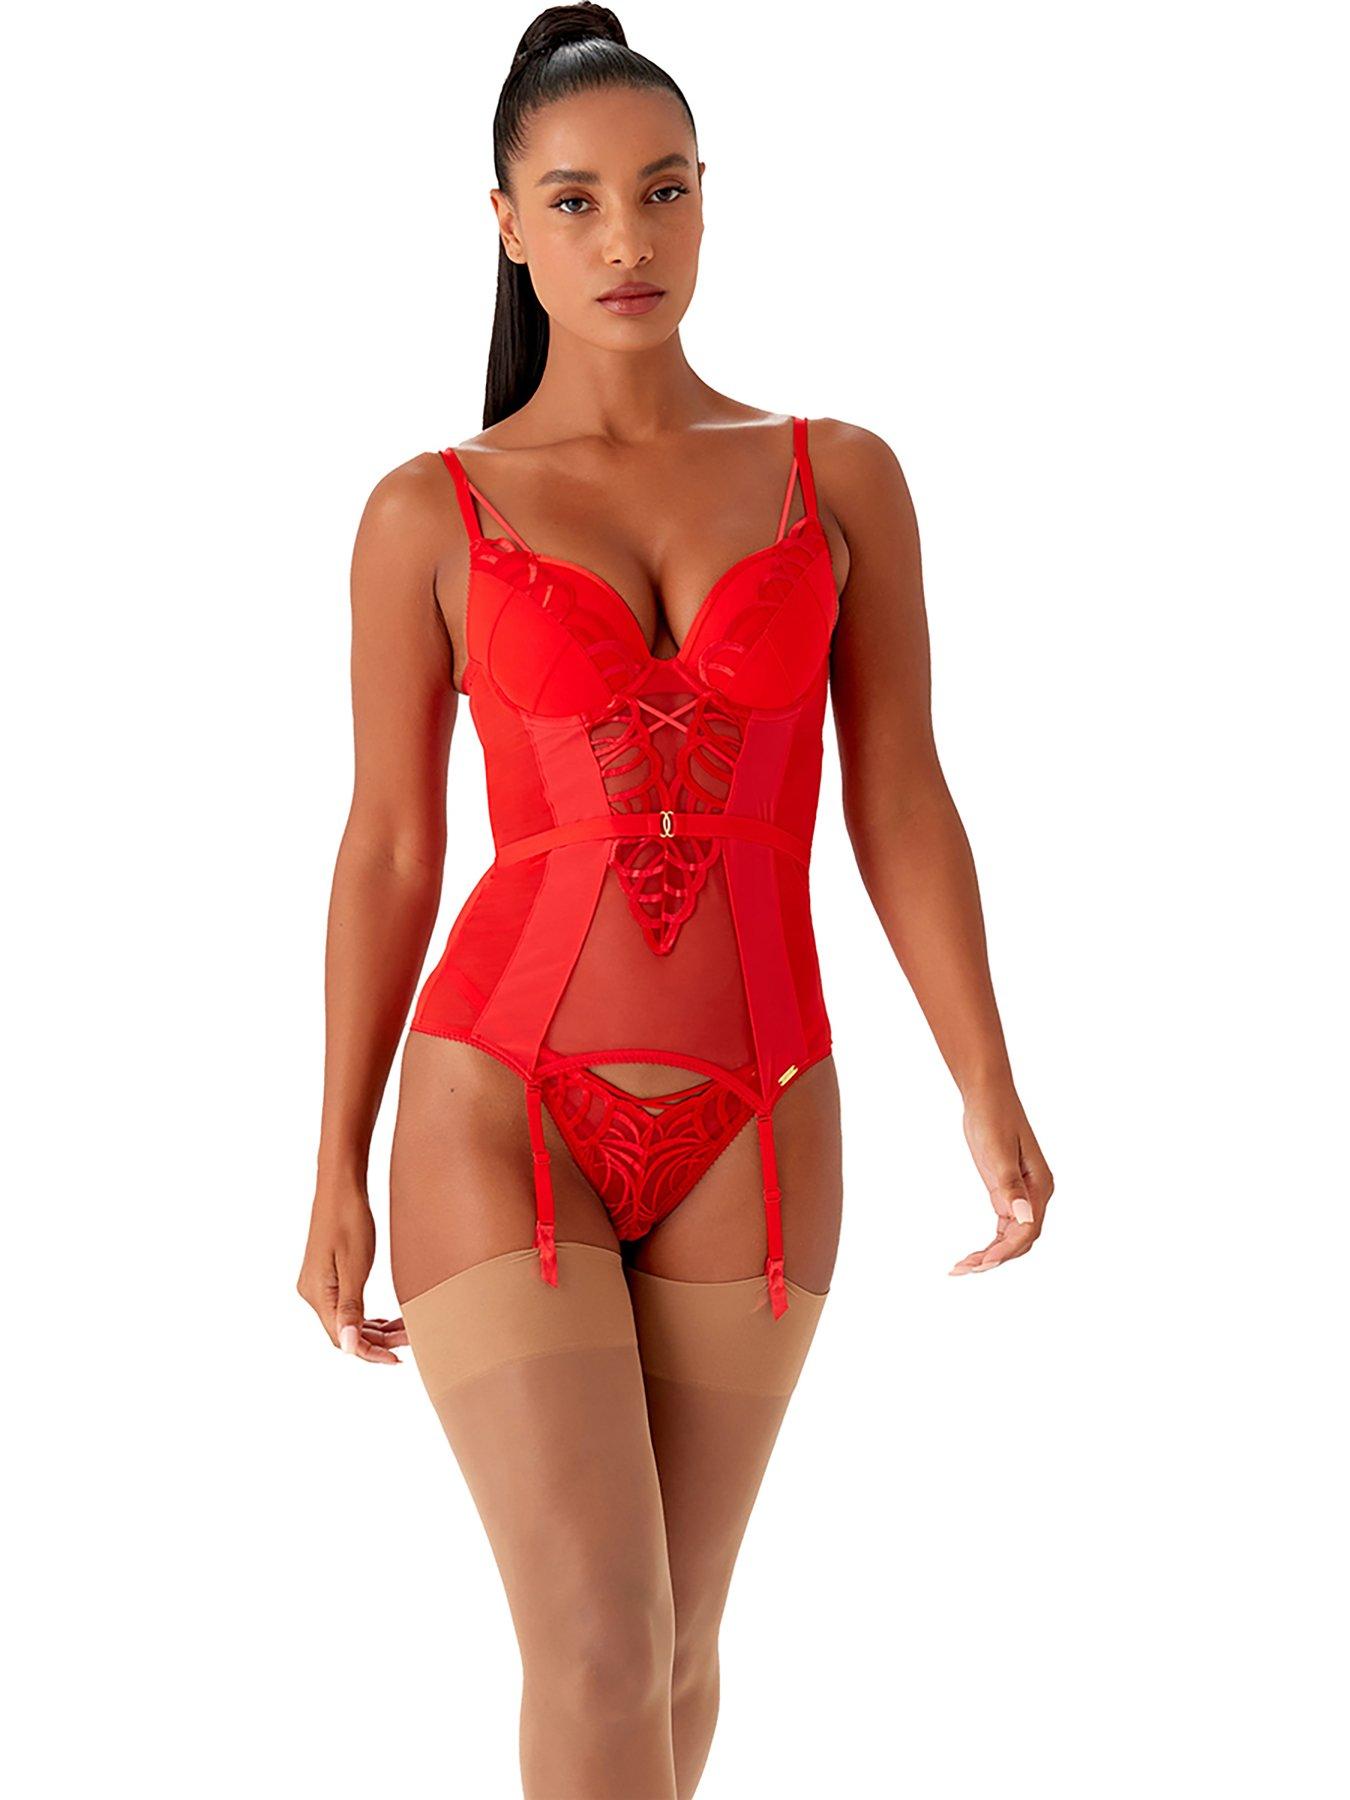 Brias Lace Bustier In Fire Red